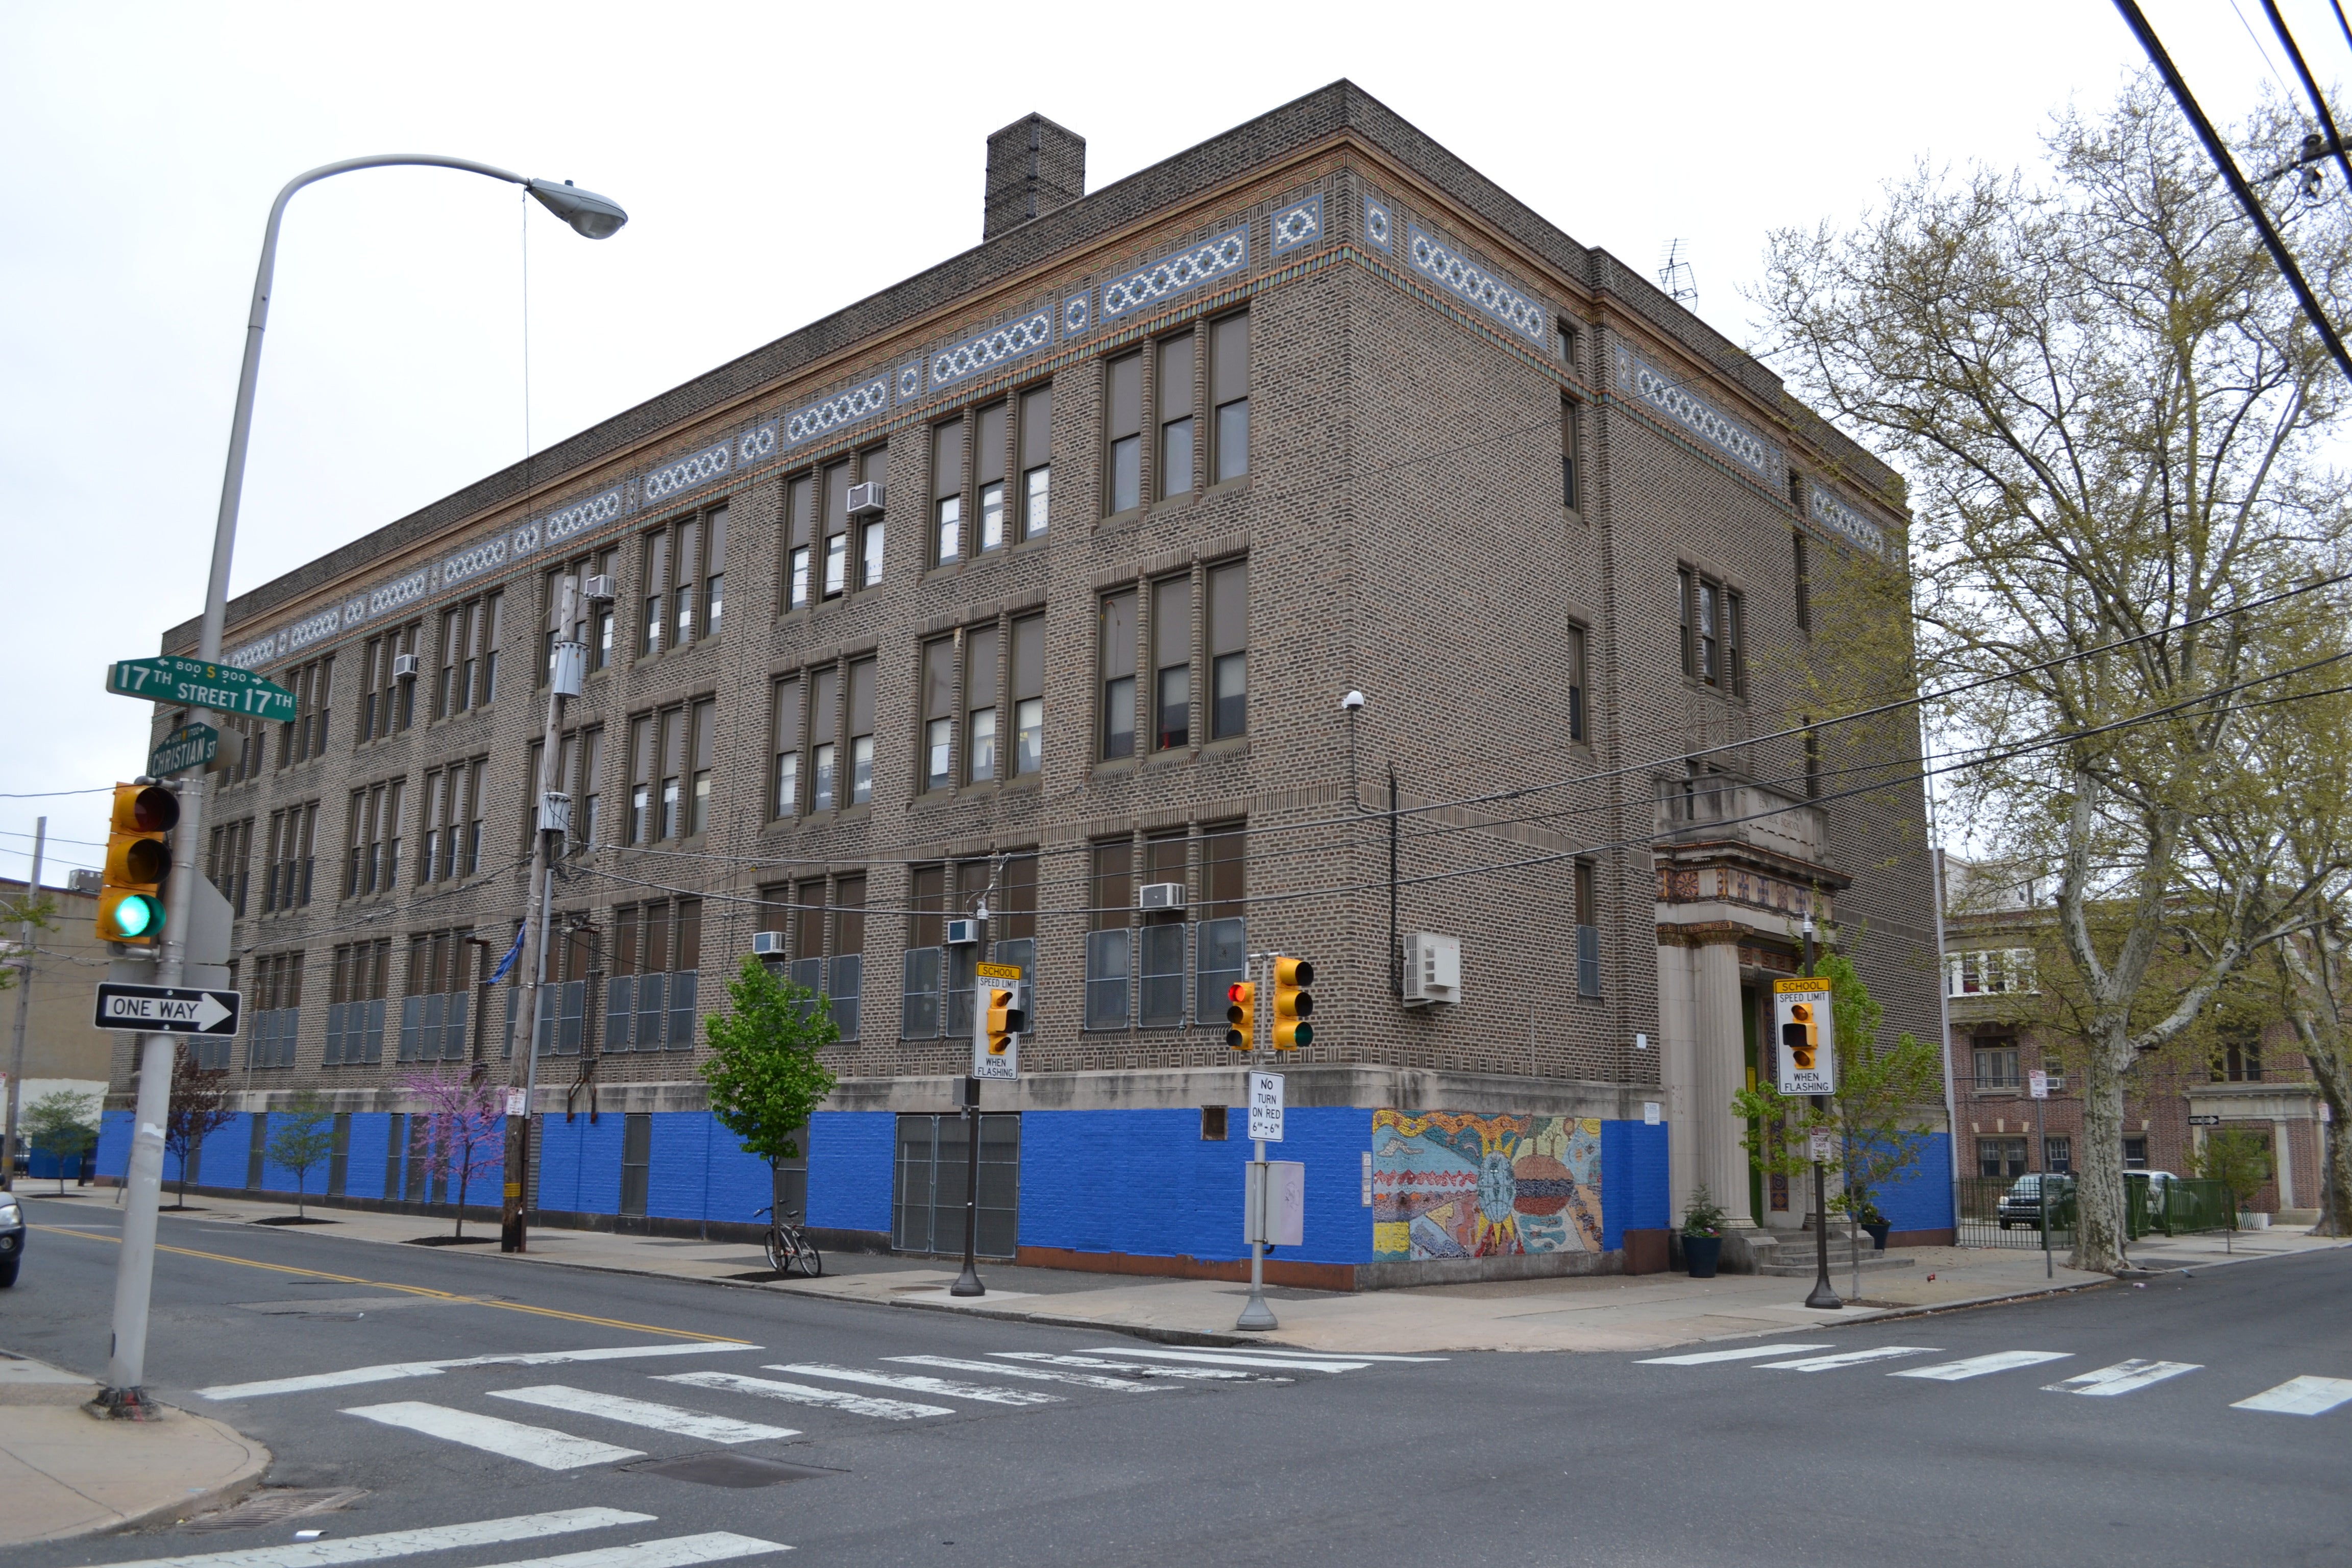 The project scope is limited to the schoolyard, not the full permitter of the building